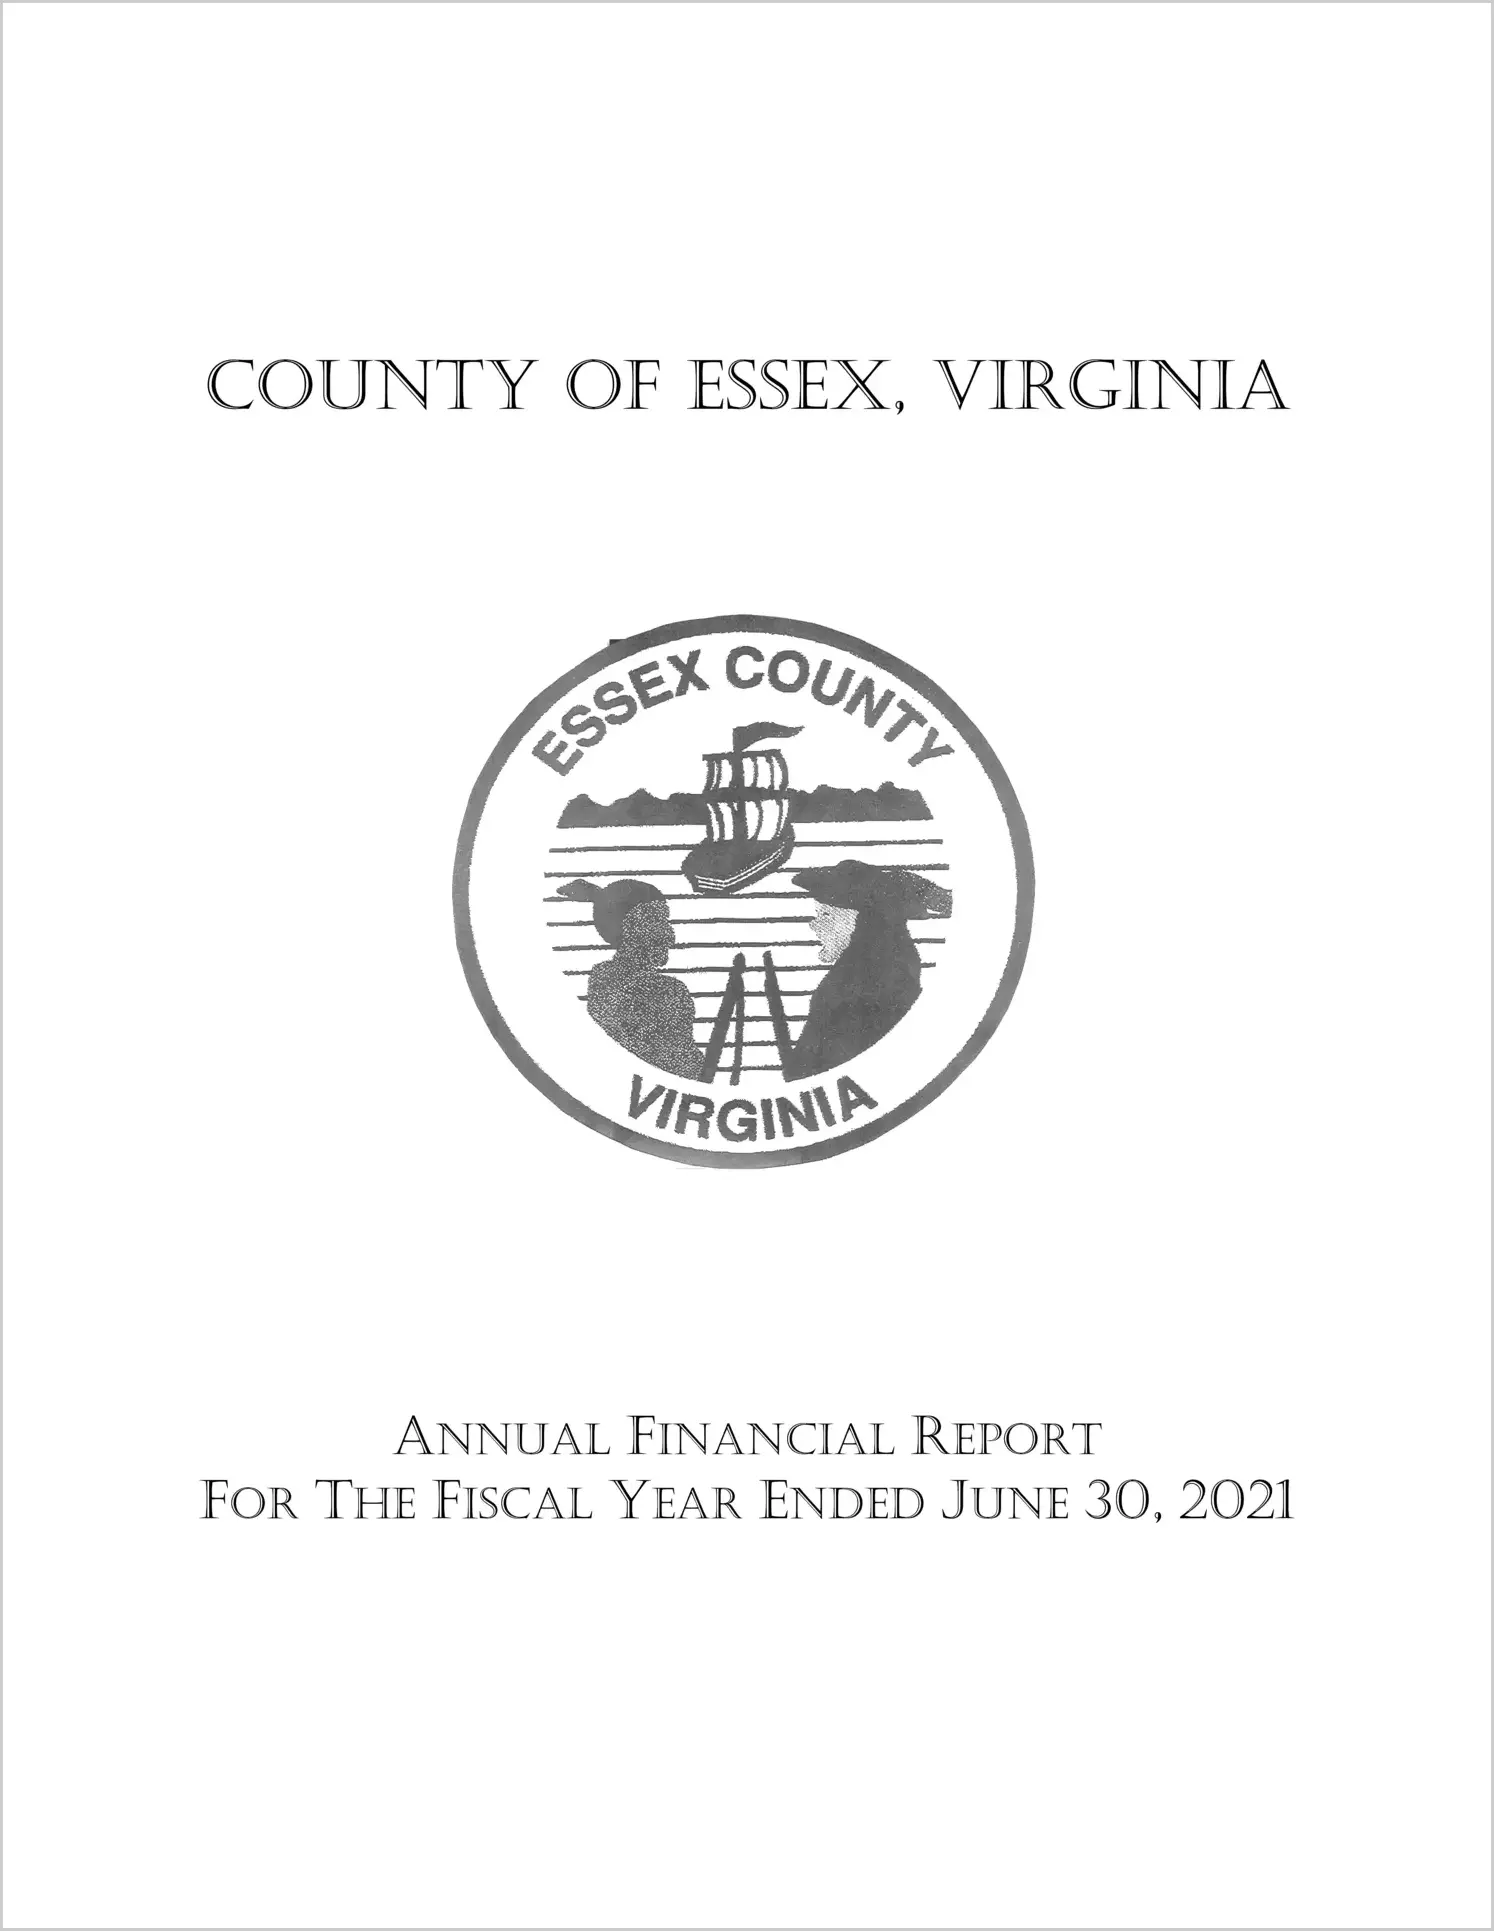 2021 Annual Financial Report for County of Essex